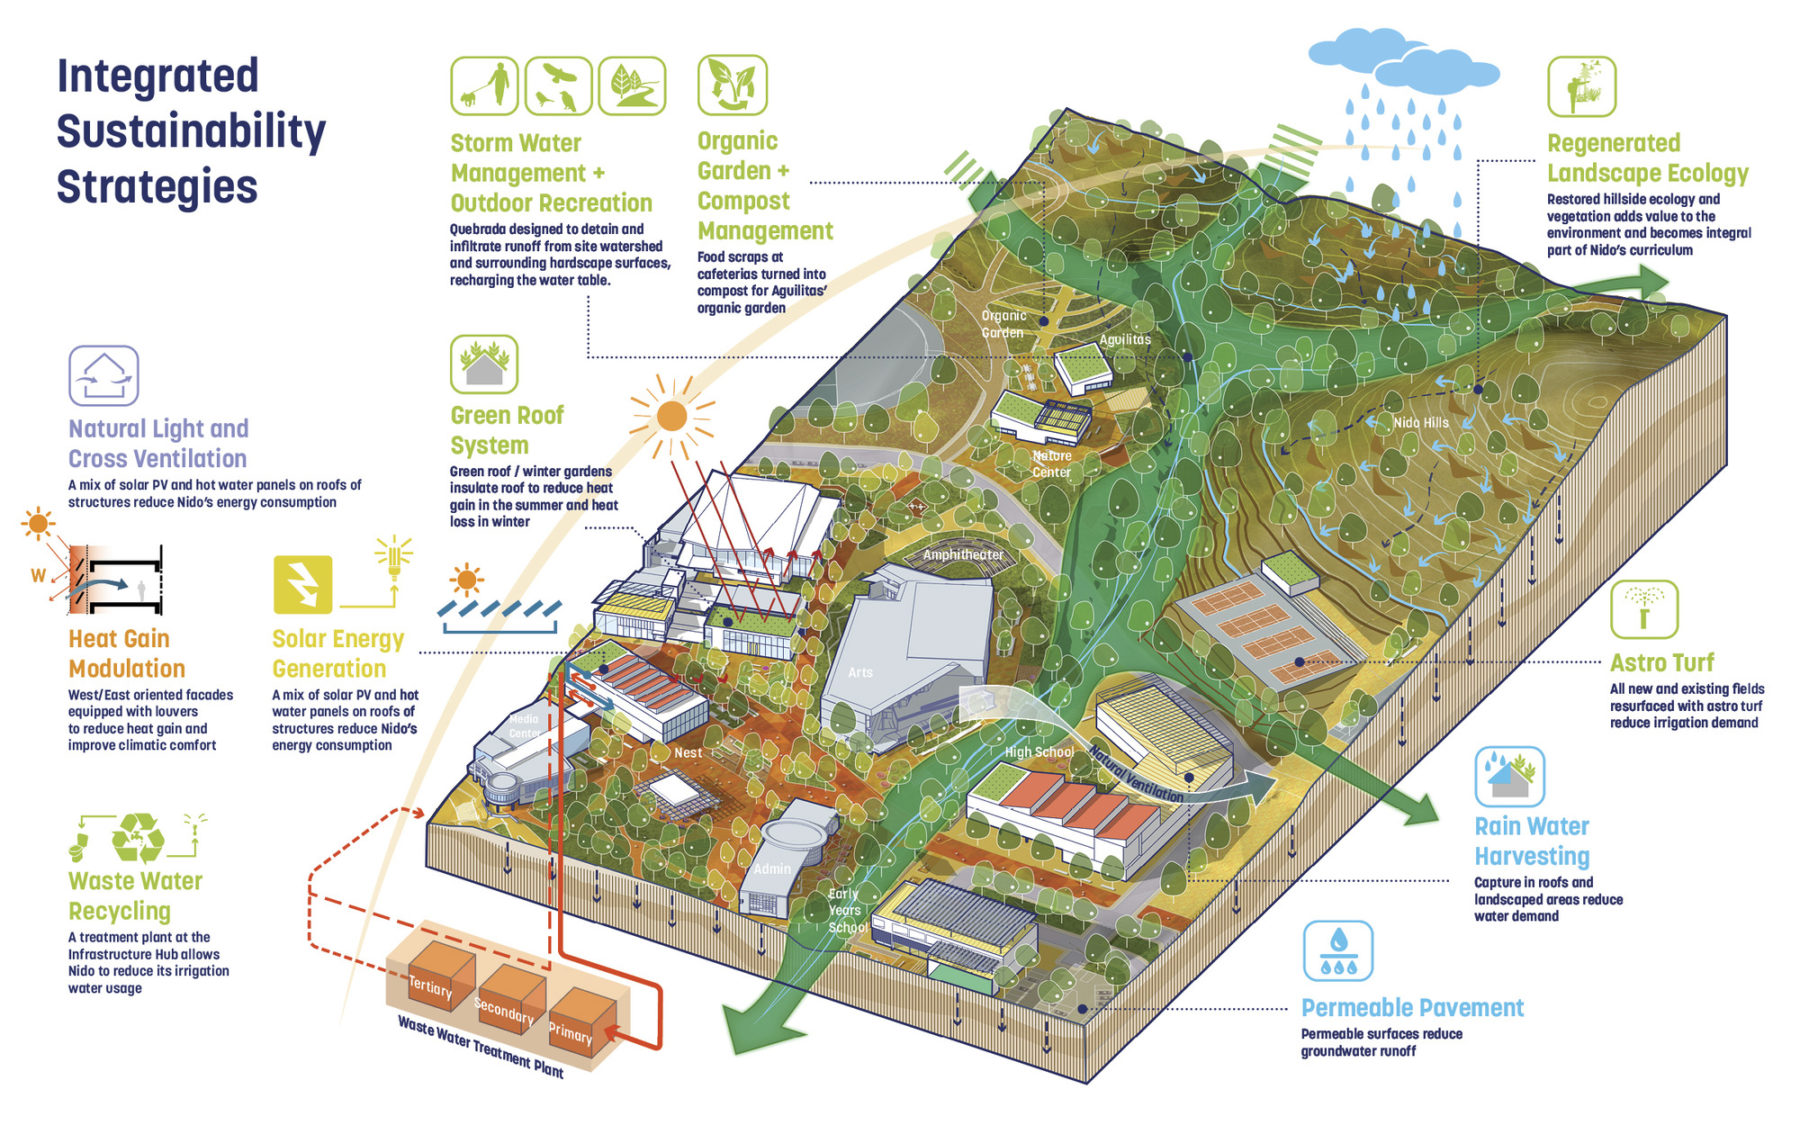 axon diagram highlighting the campus' sustainability strategies. callouts and icons highlight different features and the image title reads 